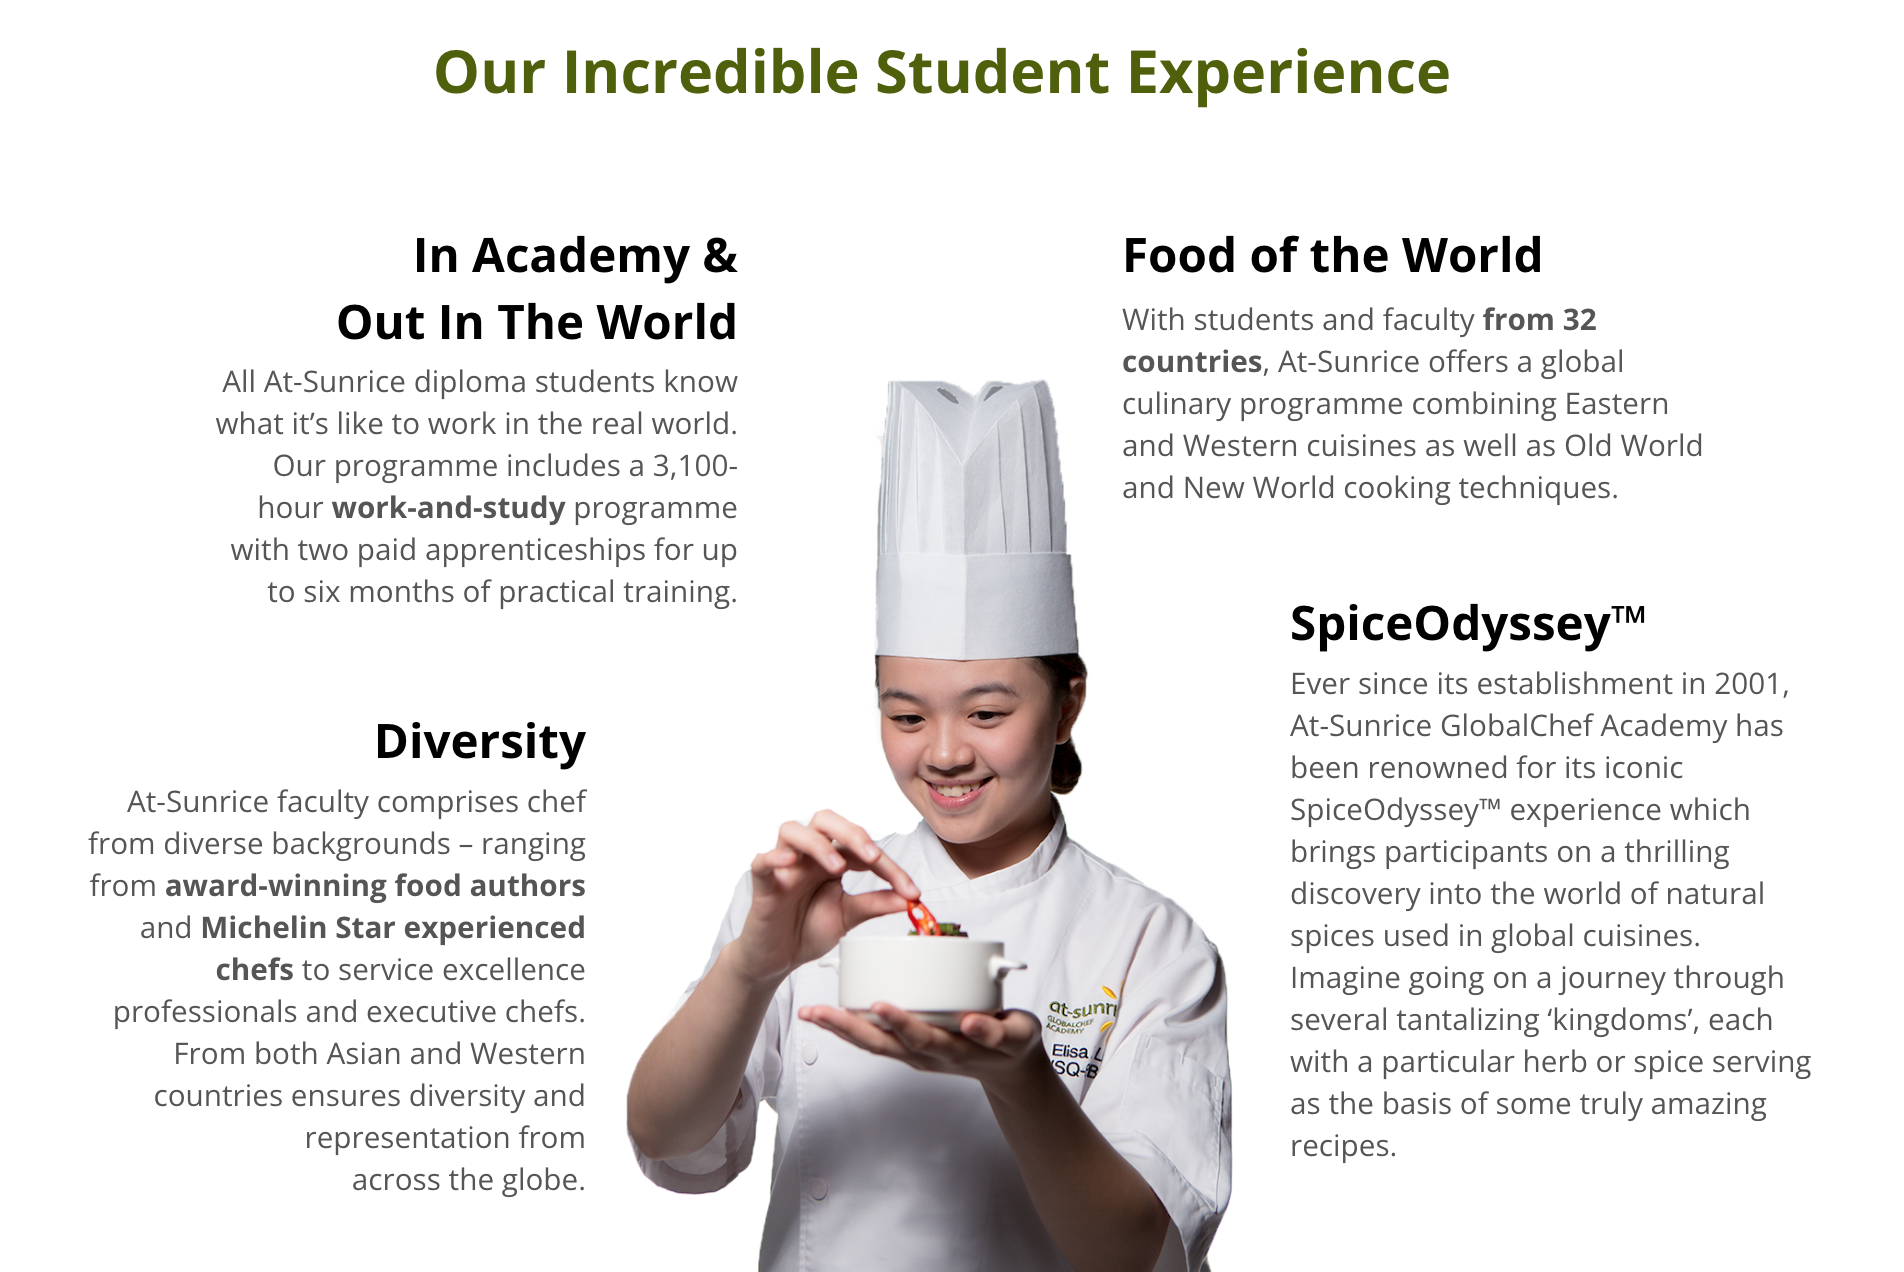 At-Sunrice Student Experience